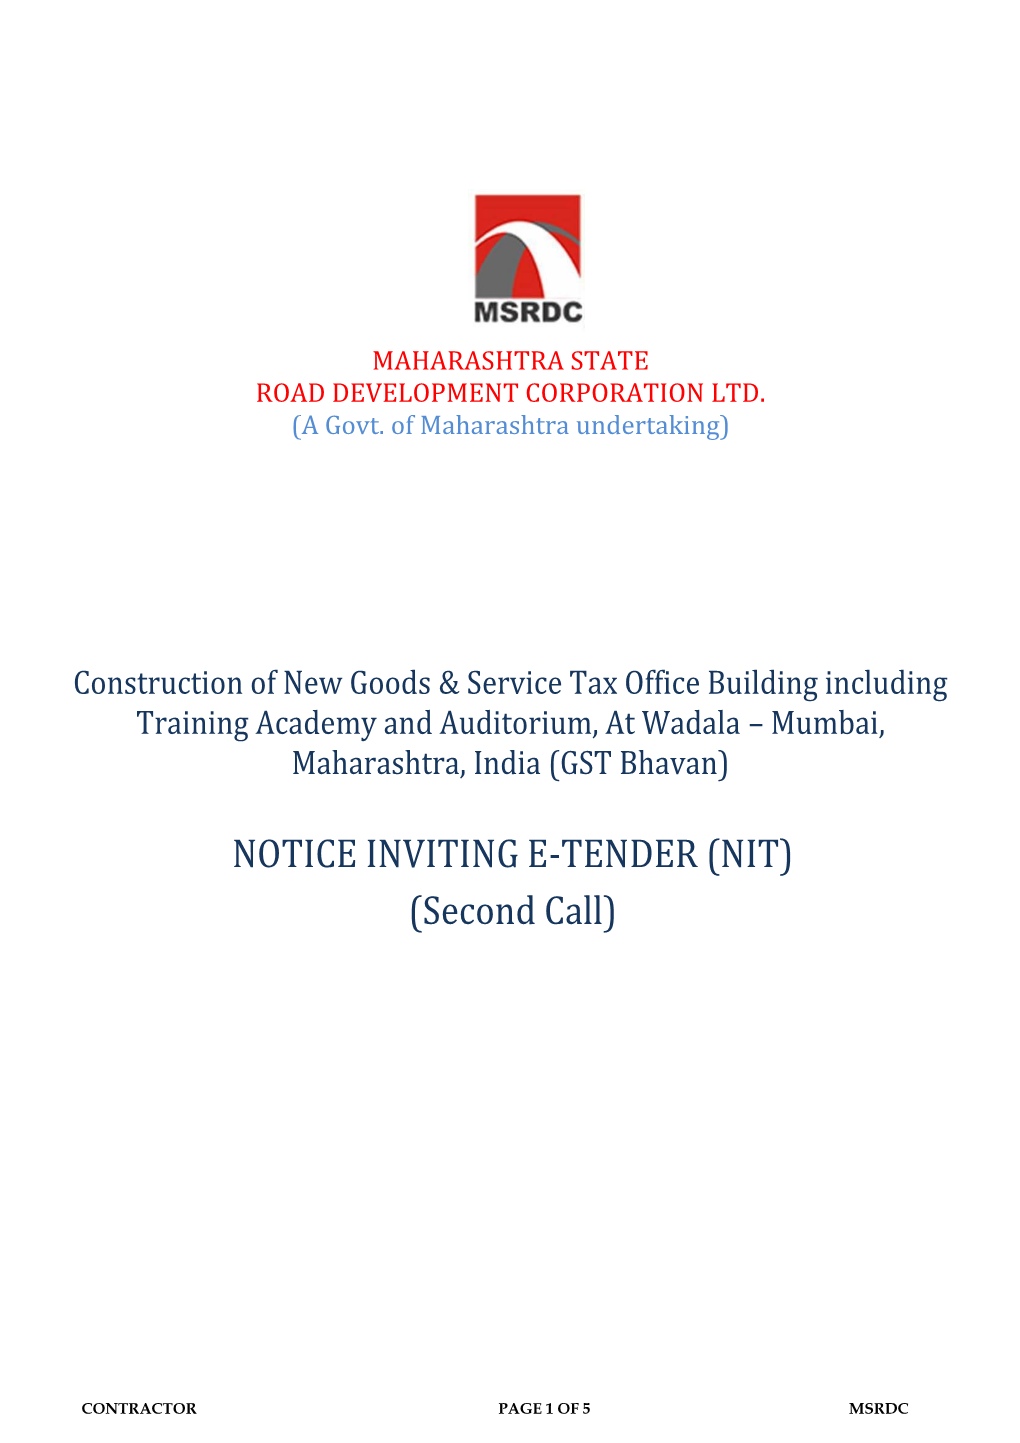 NOTICE INVITING E-TENDER (NIT) (Second Call)